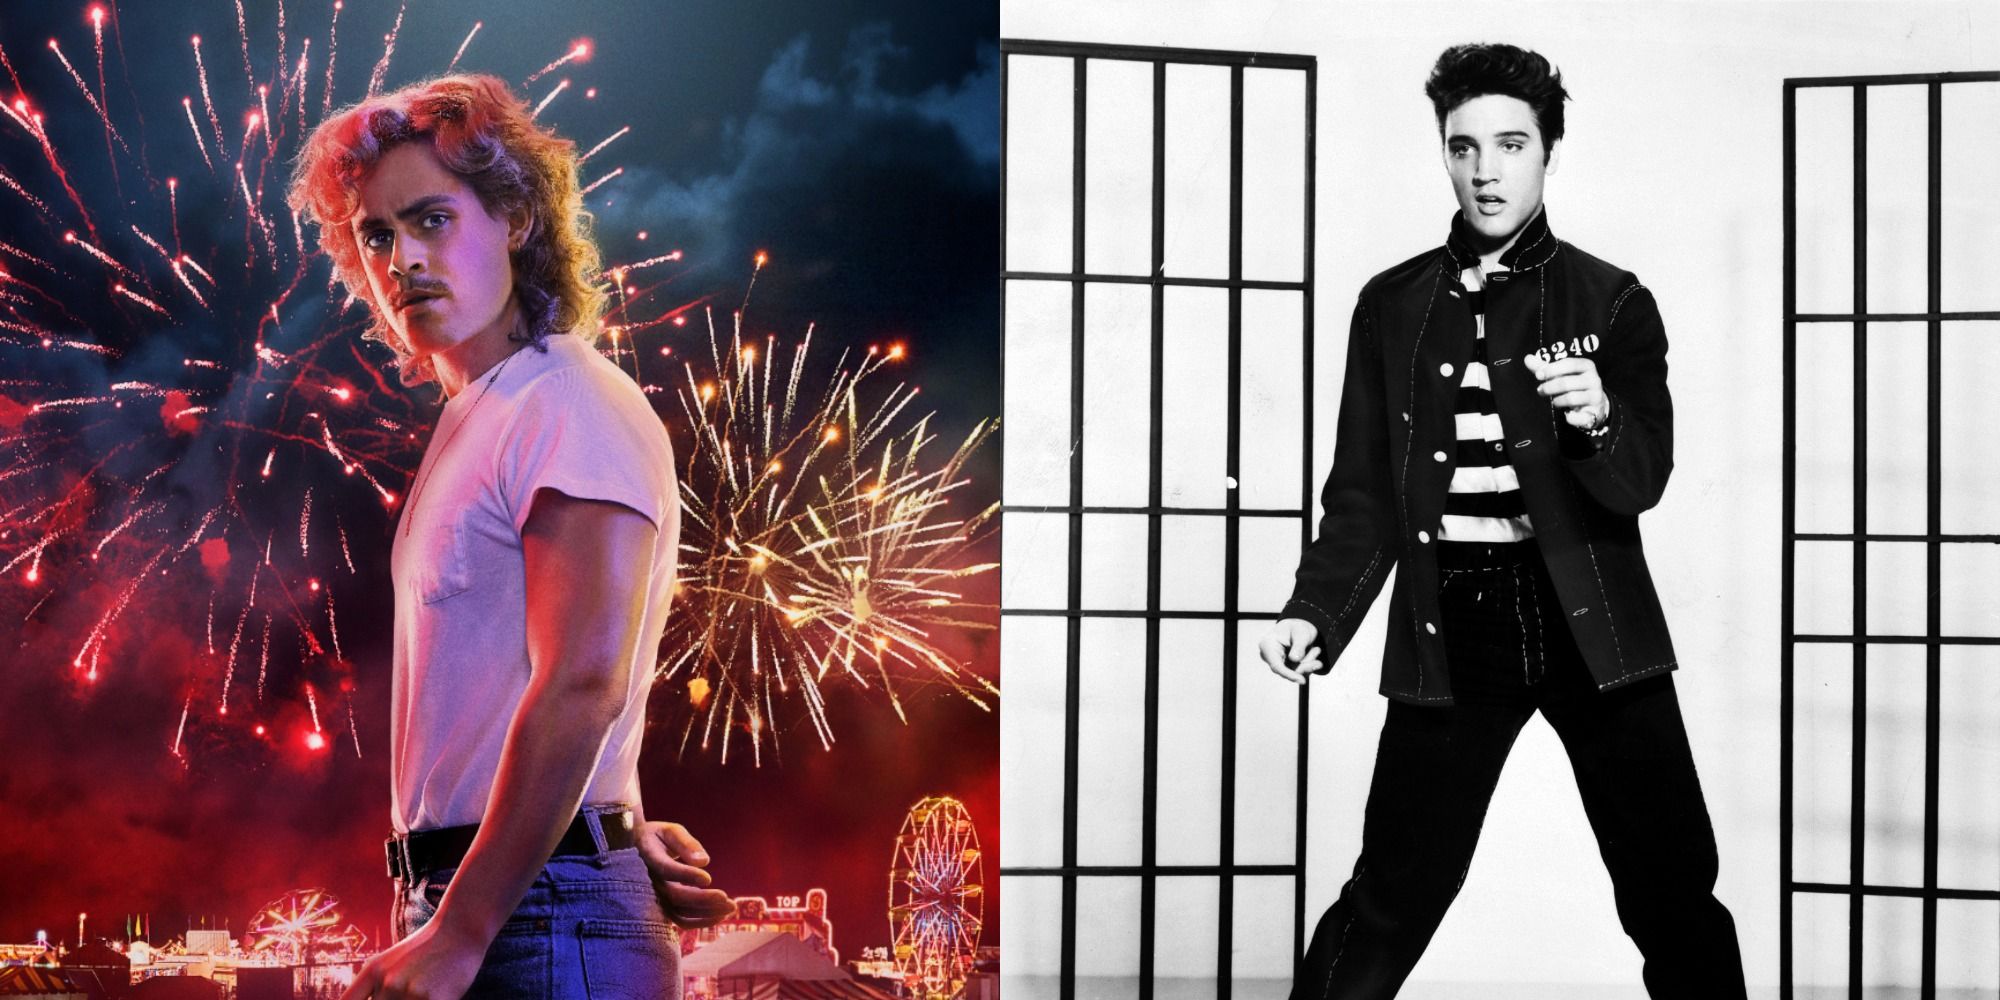 Dacre Montgomery Stranger Things fireworks in the background Elvis Presley iconic dance pose 